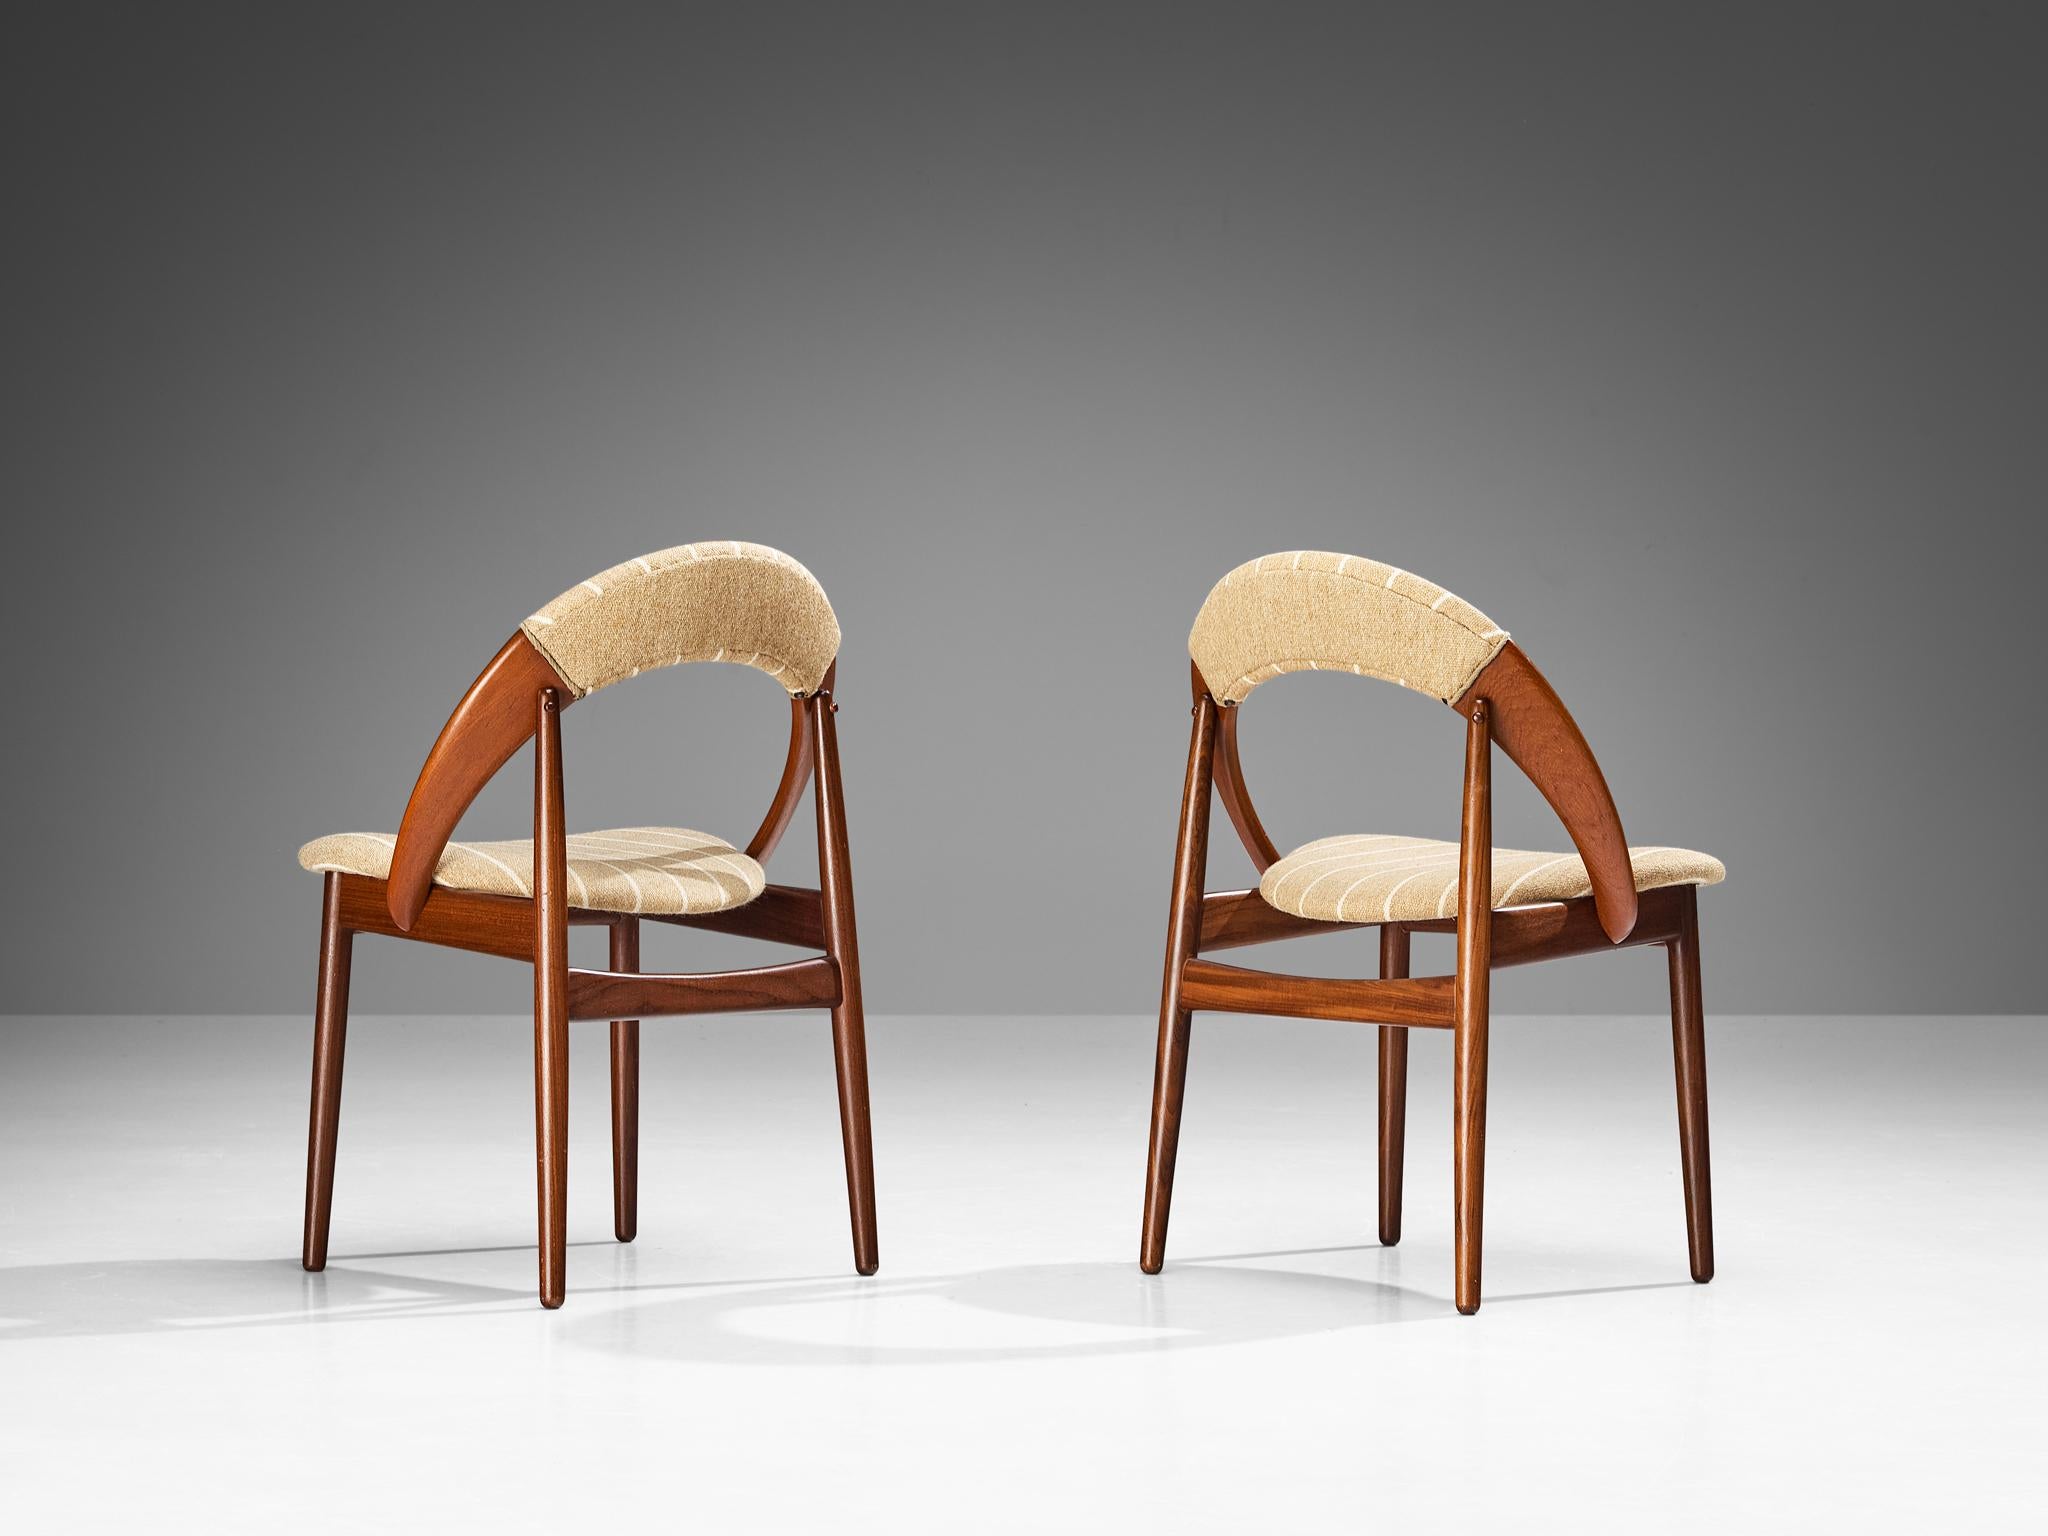 Mid-20th Century Arne Hovmand-Olsen Set of Six Dining Chairs in Teak & Striped Beige Fabric  For Sale